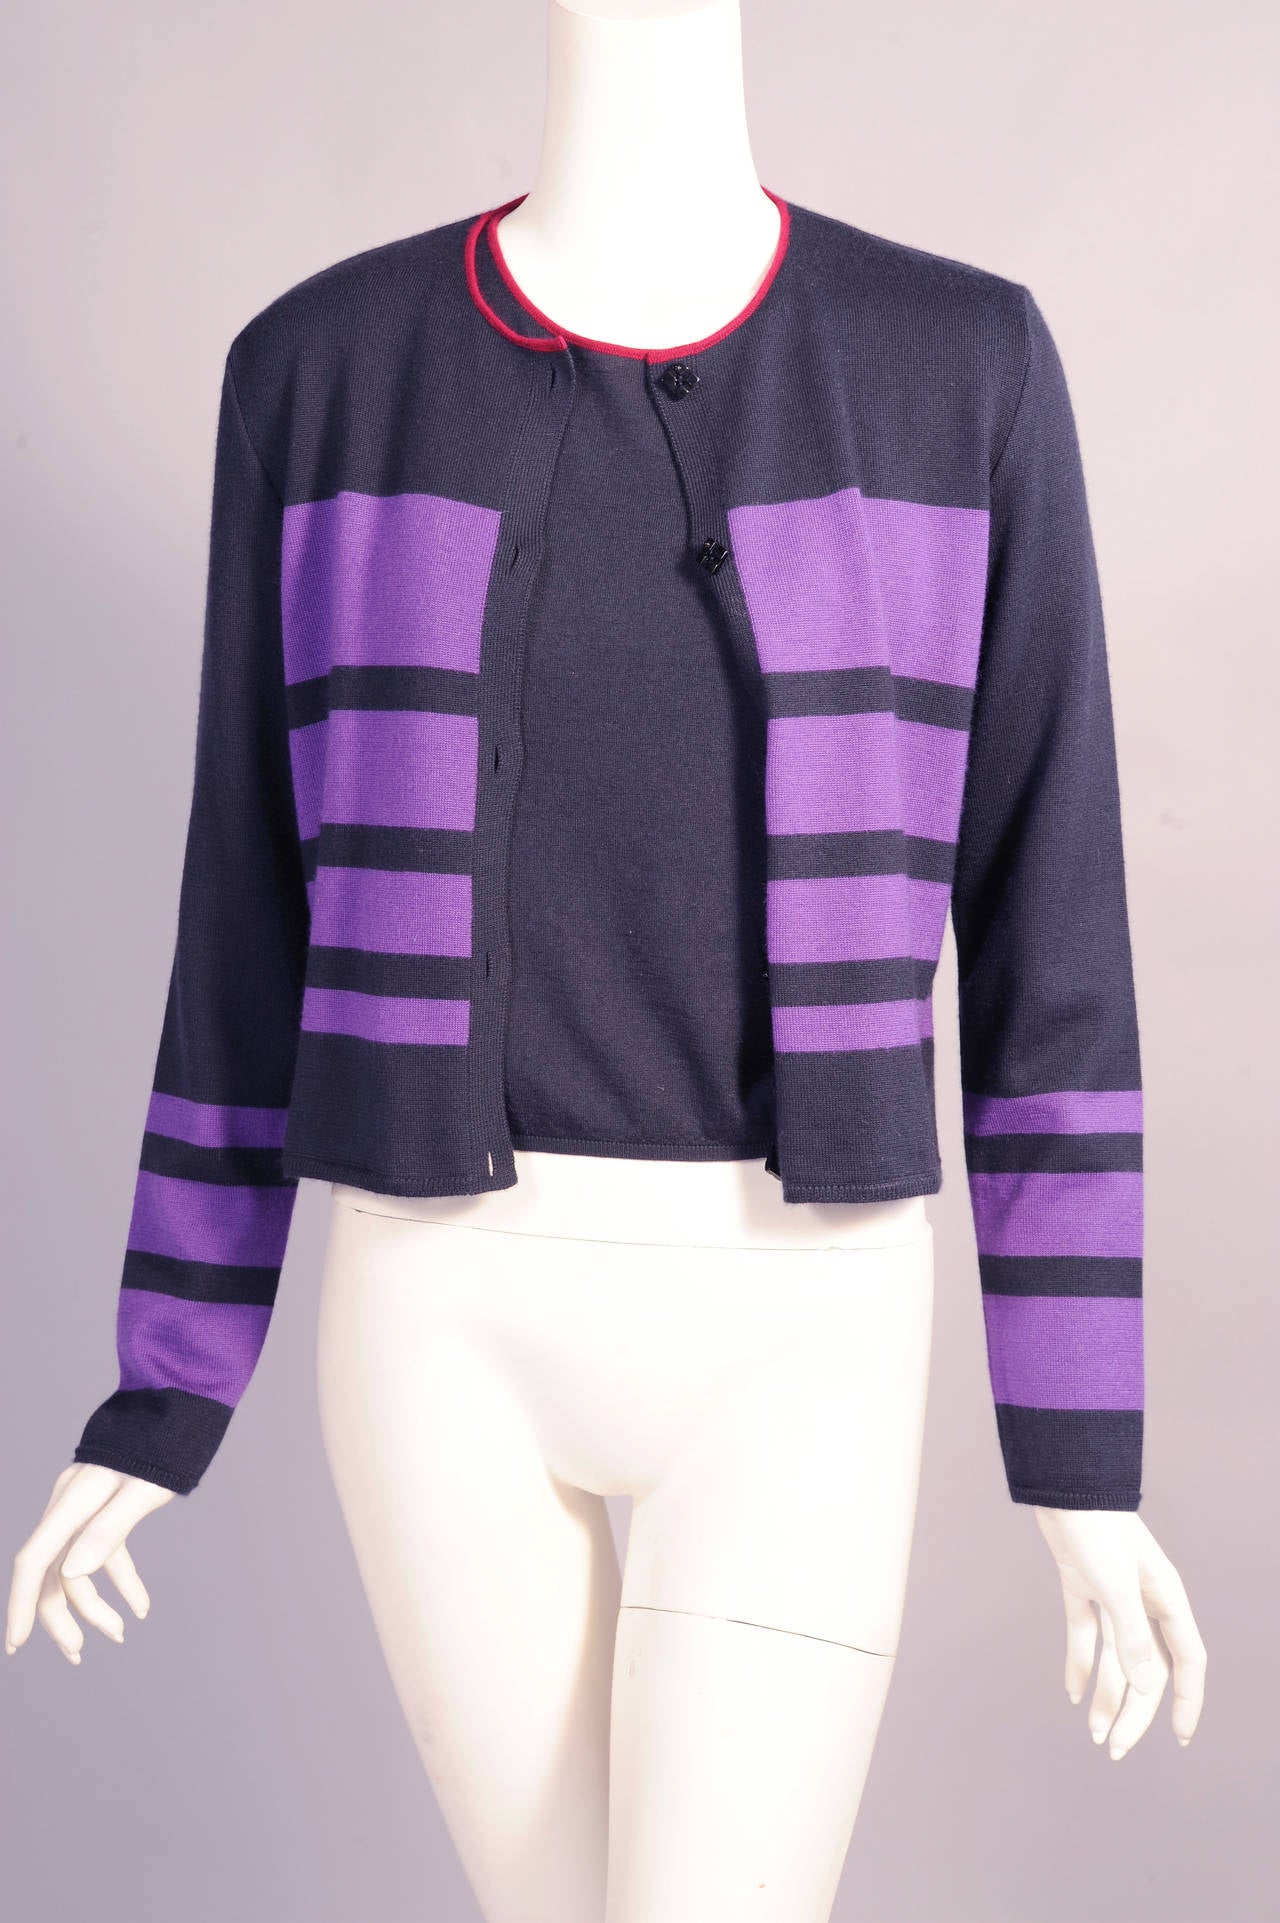 A midnight blue cashmere and silk blend cardigan has a burgundy edge at the neckline and purple bands in decreasing widths on the body. There are five black Chanel logo buttons at the center front. A midnight blue sleeveless sweater with a matching